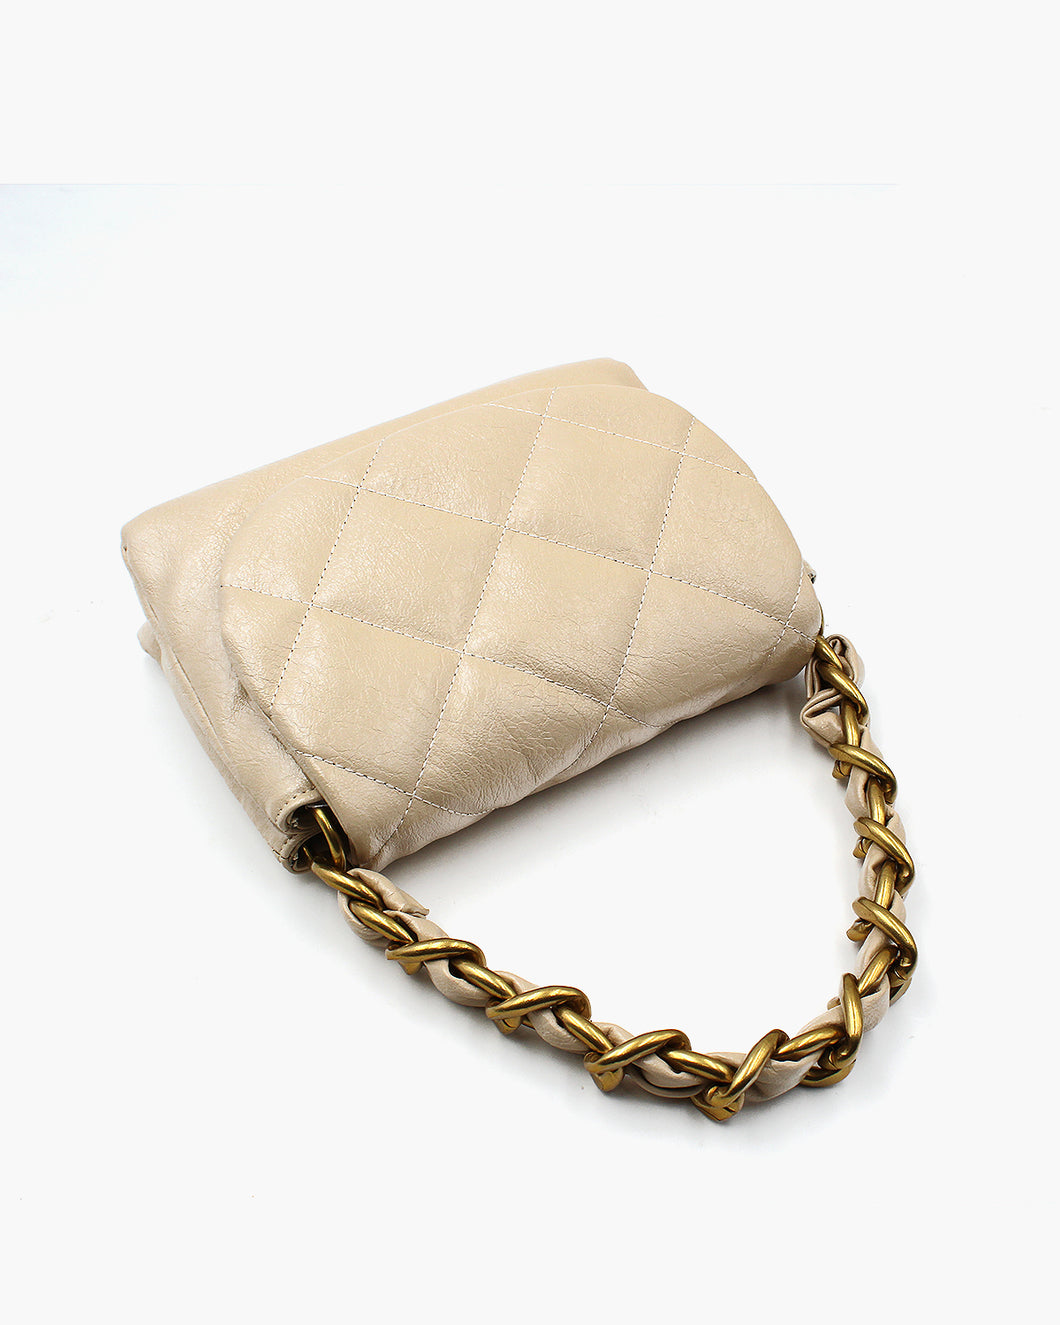 Glossy Rich Textured Leather Bag with Brass Hardware